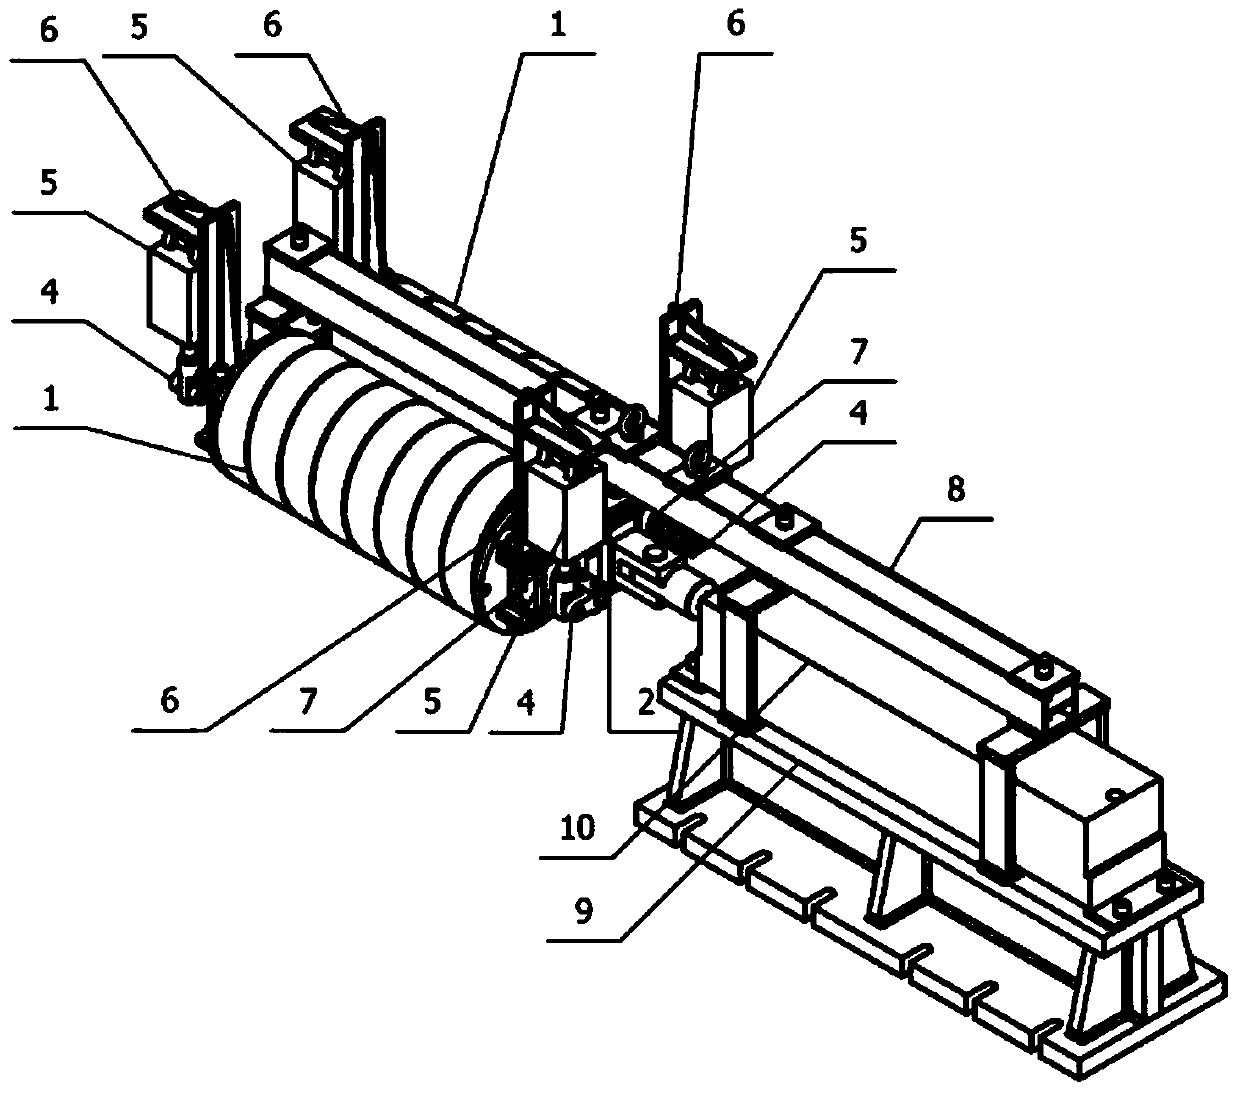 An automatic grinding device